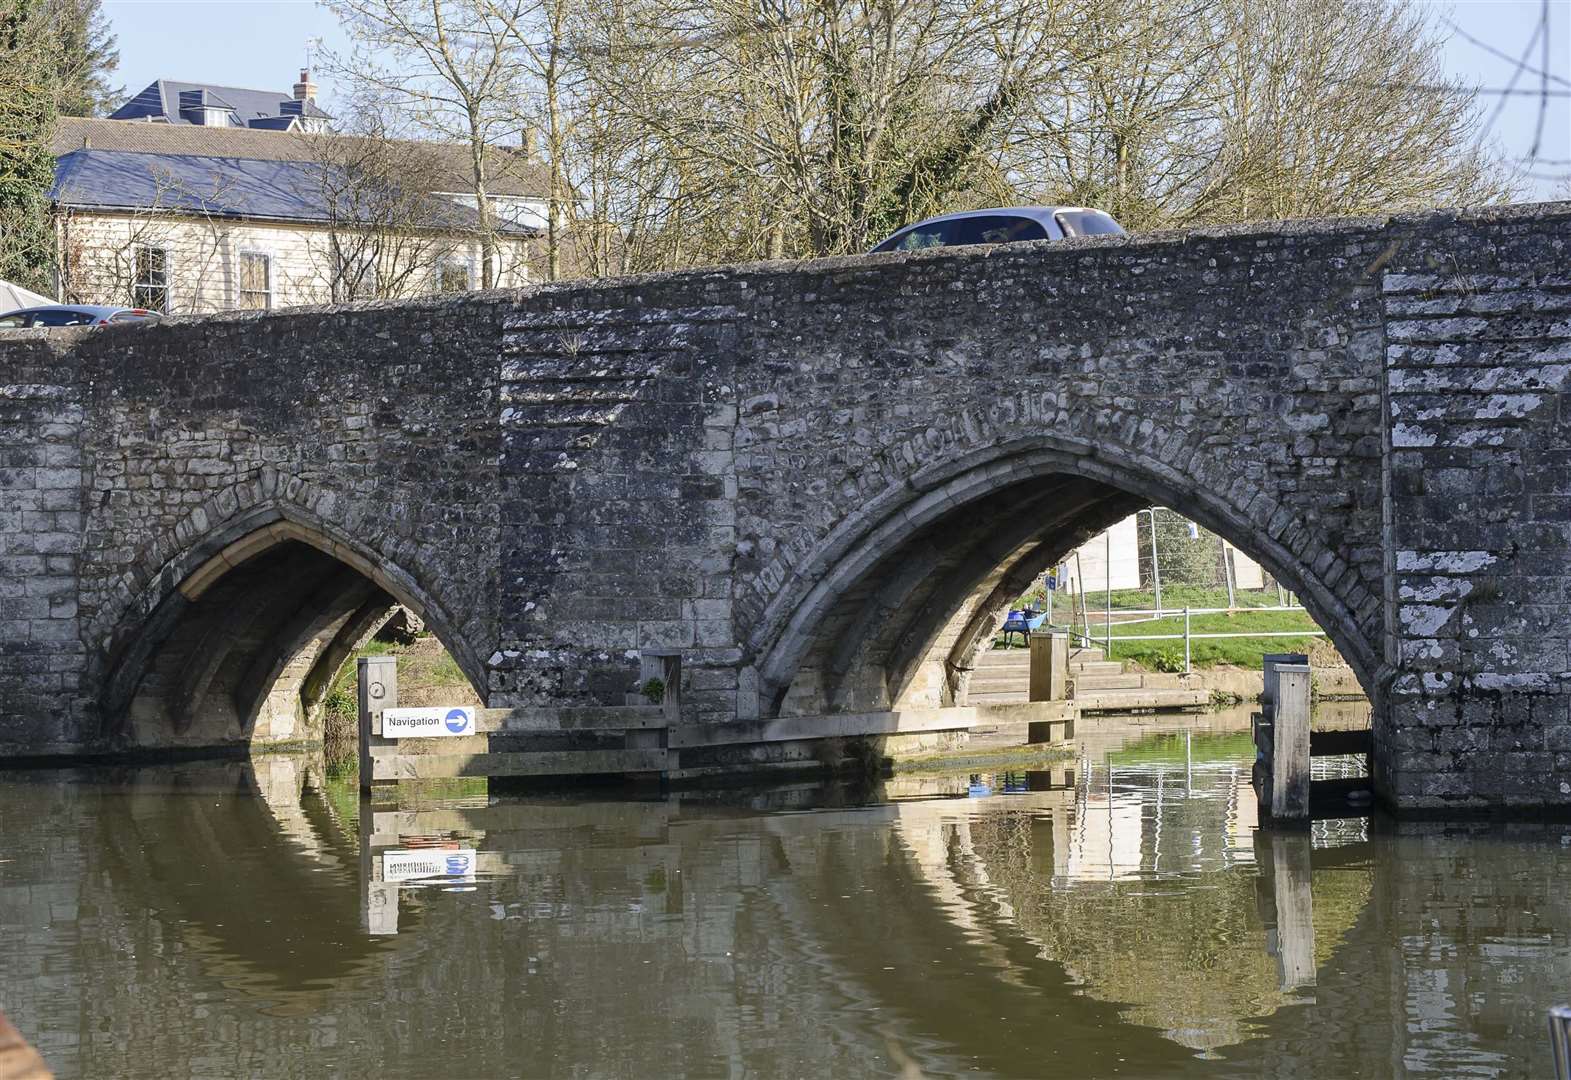 Drivers cannot use East Farleigh Bridge due to the road closure